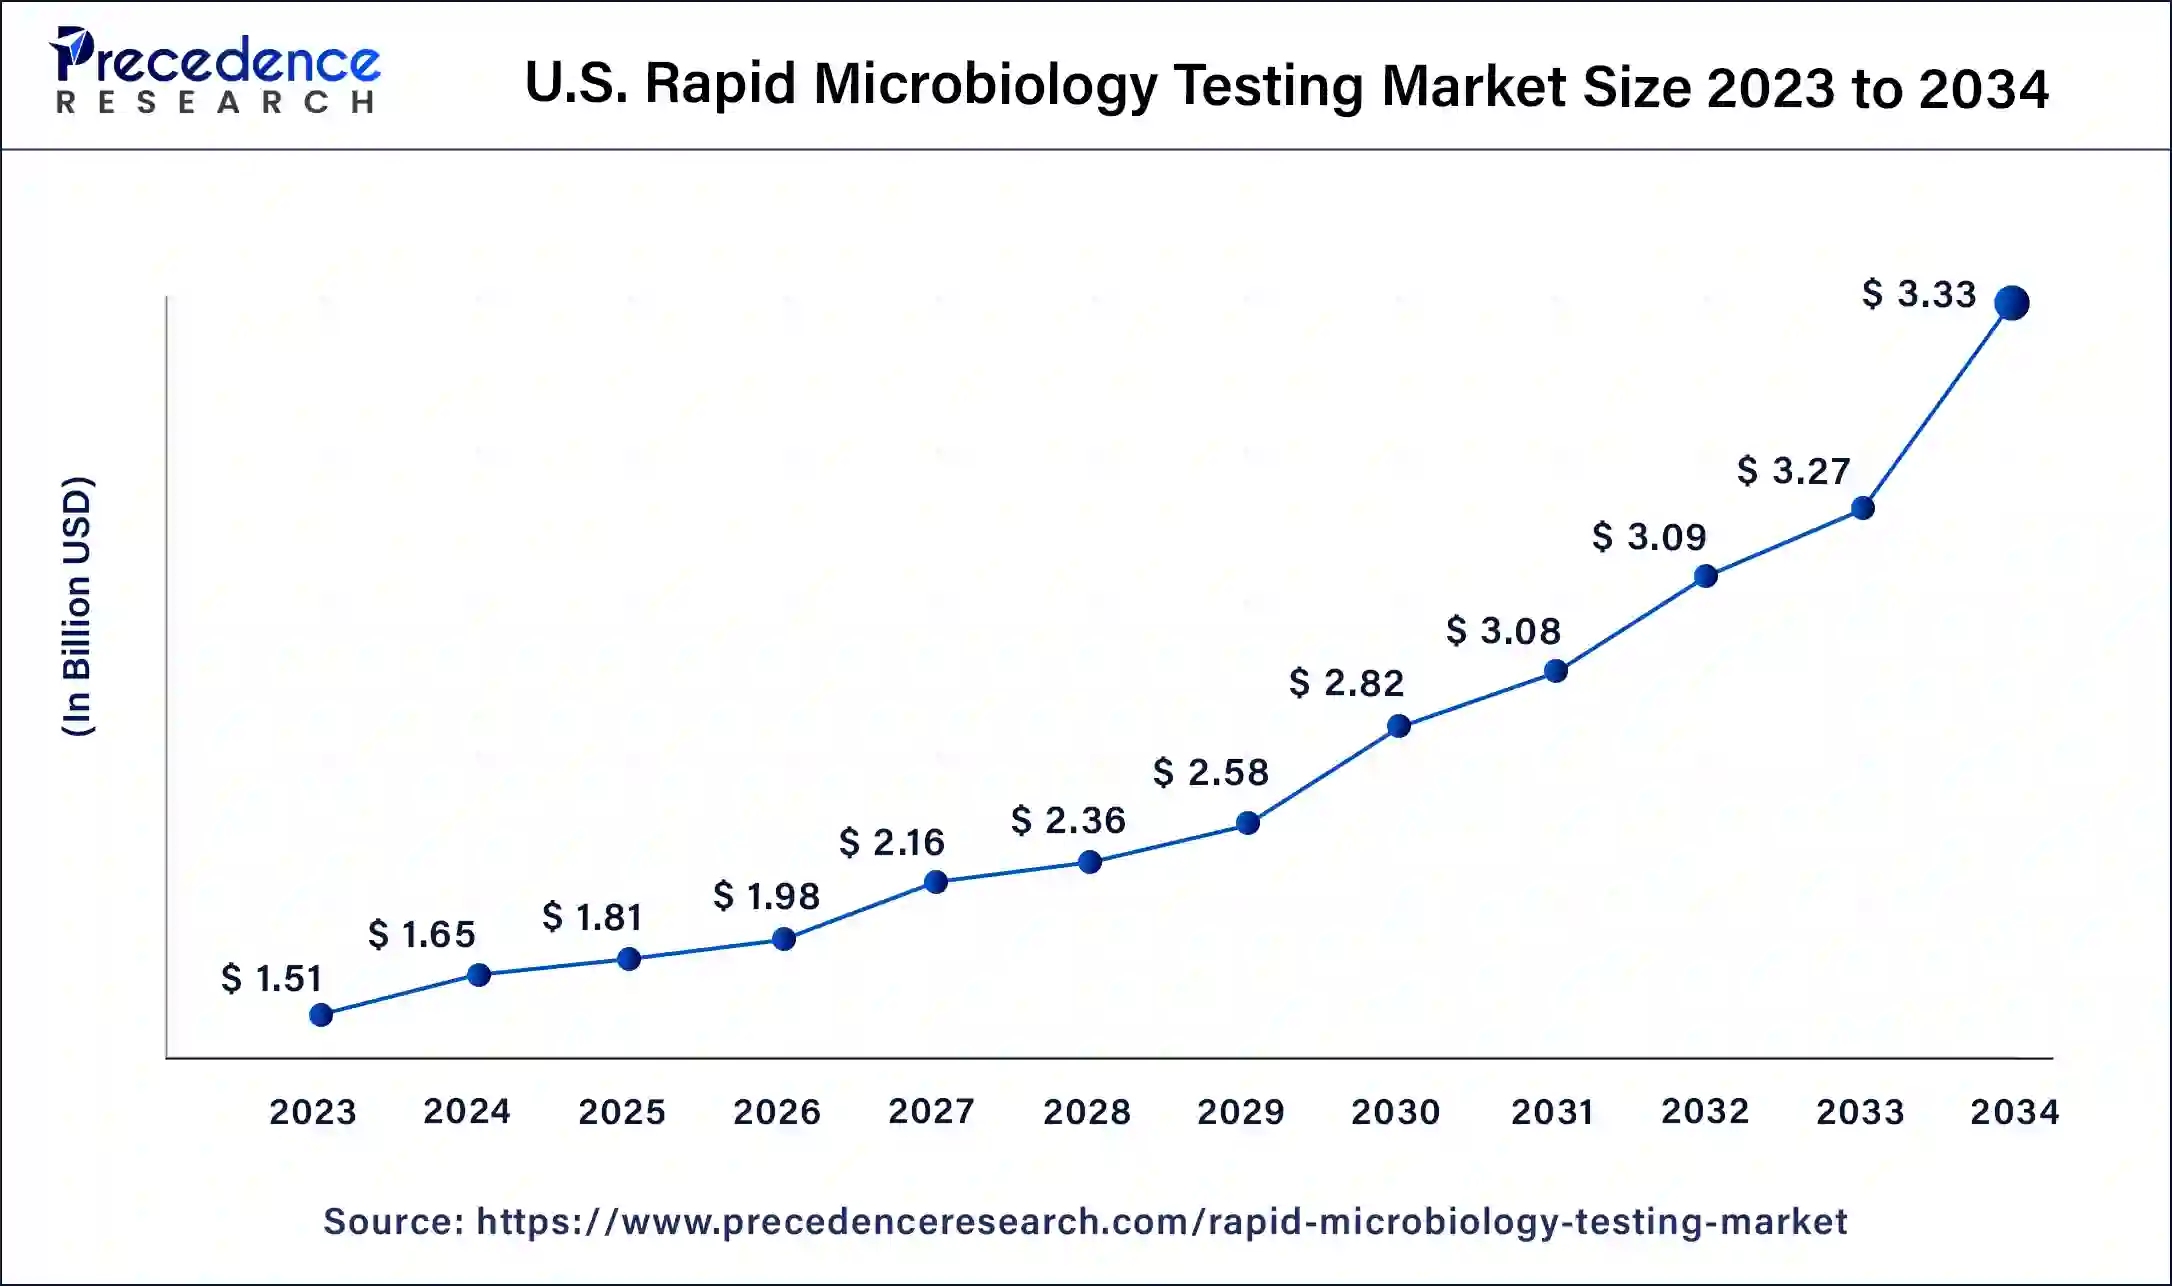 U.S. Rapid Microbiology Testing Market Size 2024 To 2034